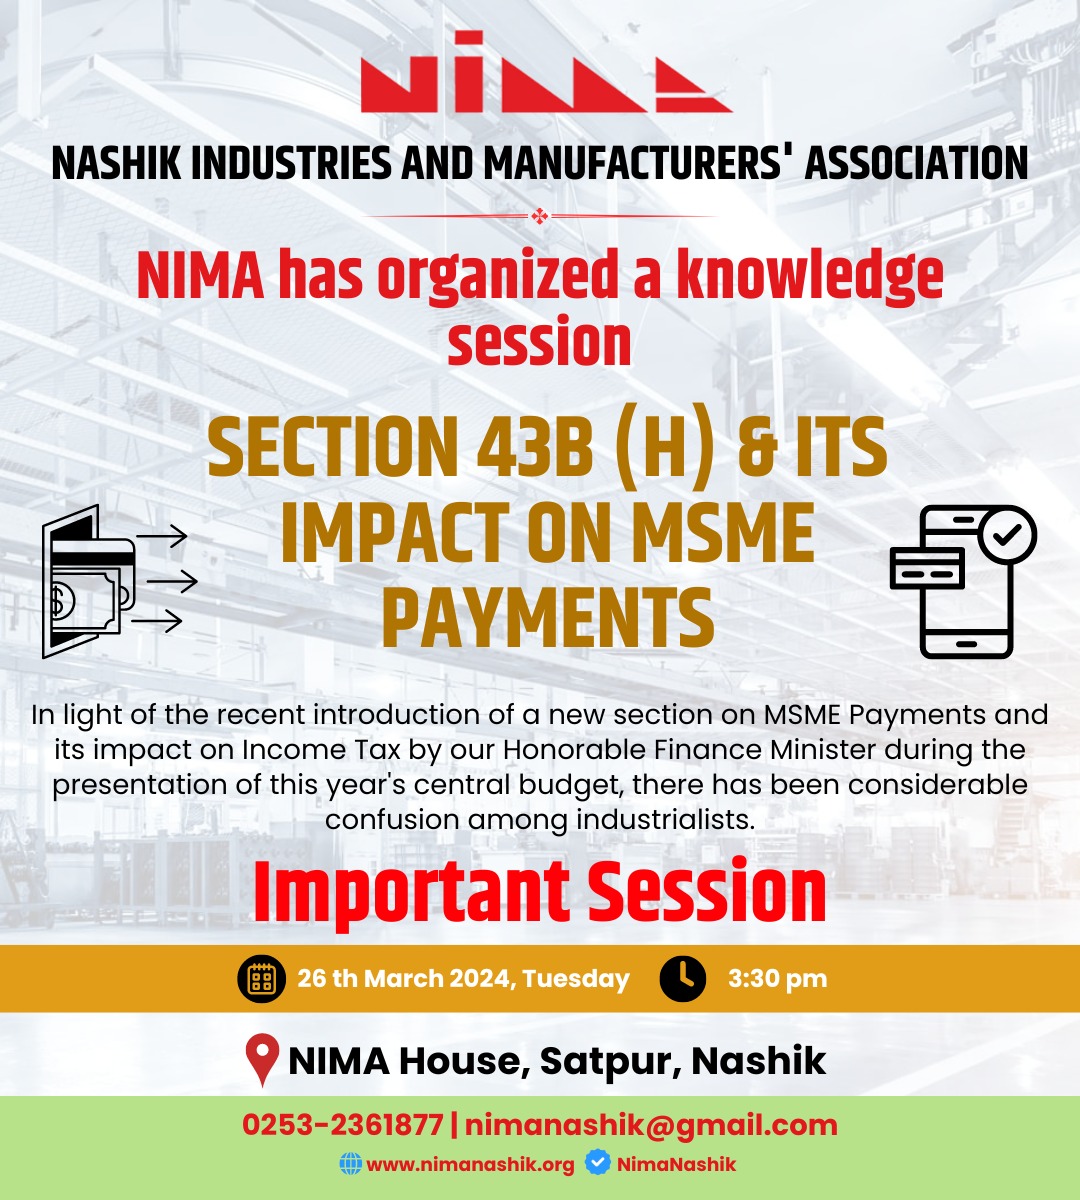 NIMA has organized a knowledge session on the topic: *SECTION 43B (H) & ITS IMPACT ON MSME PAYMENTS* *Date:* 26th March *Time:* 3:30 PM *Venue:* NIMA House, Satpur, Nashik #nima #nimanashik #session